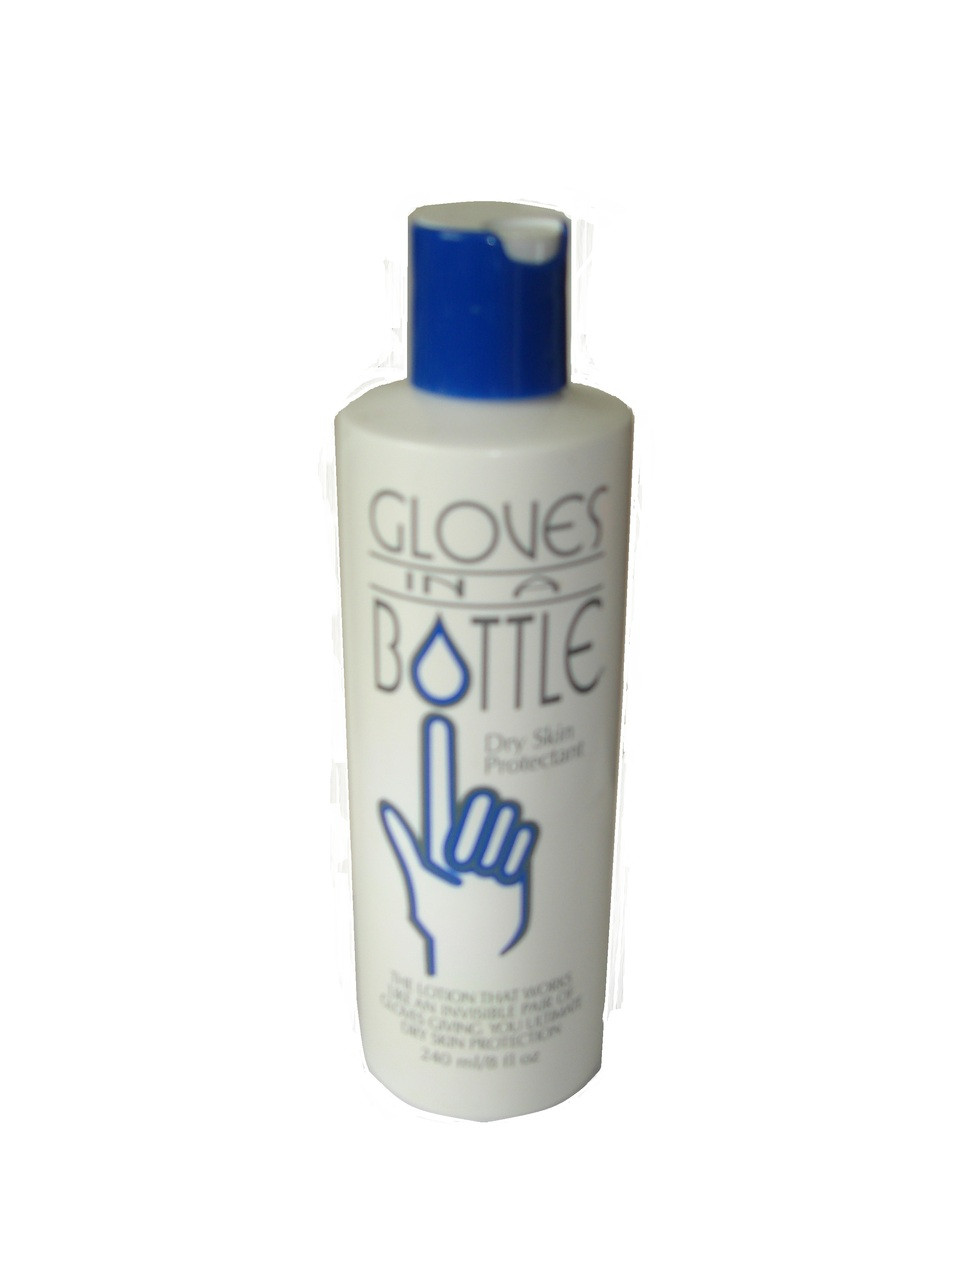 Gloves In A Bottle Dry Skin Protectant Lotion - 8 fl. Oz. - Viking Janitor  Supplies